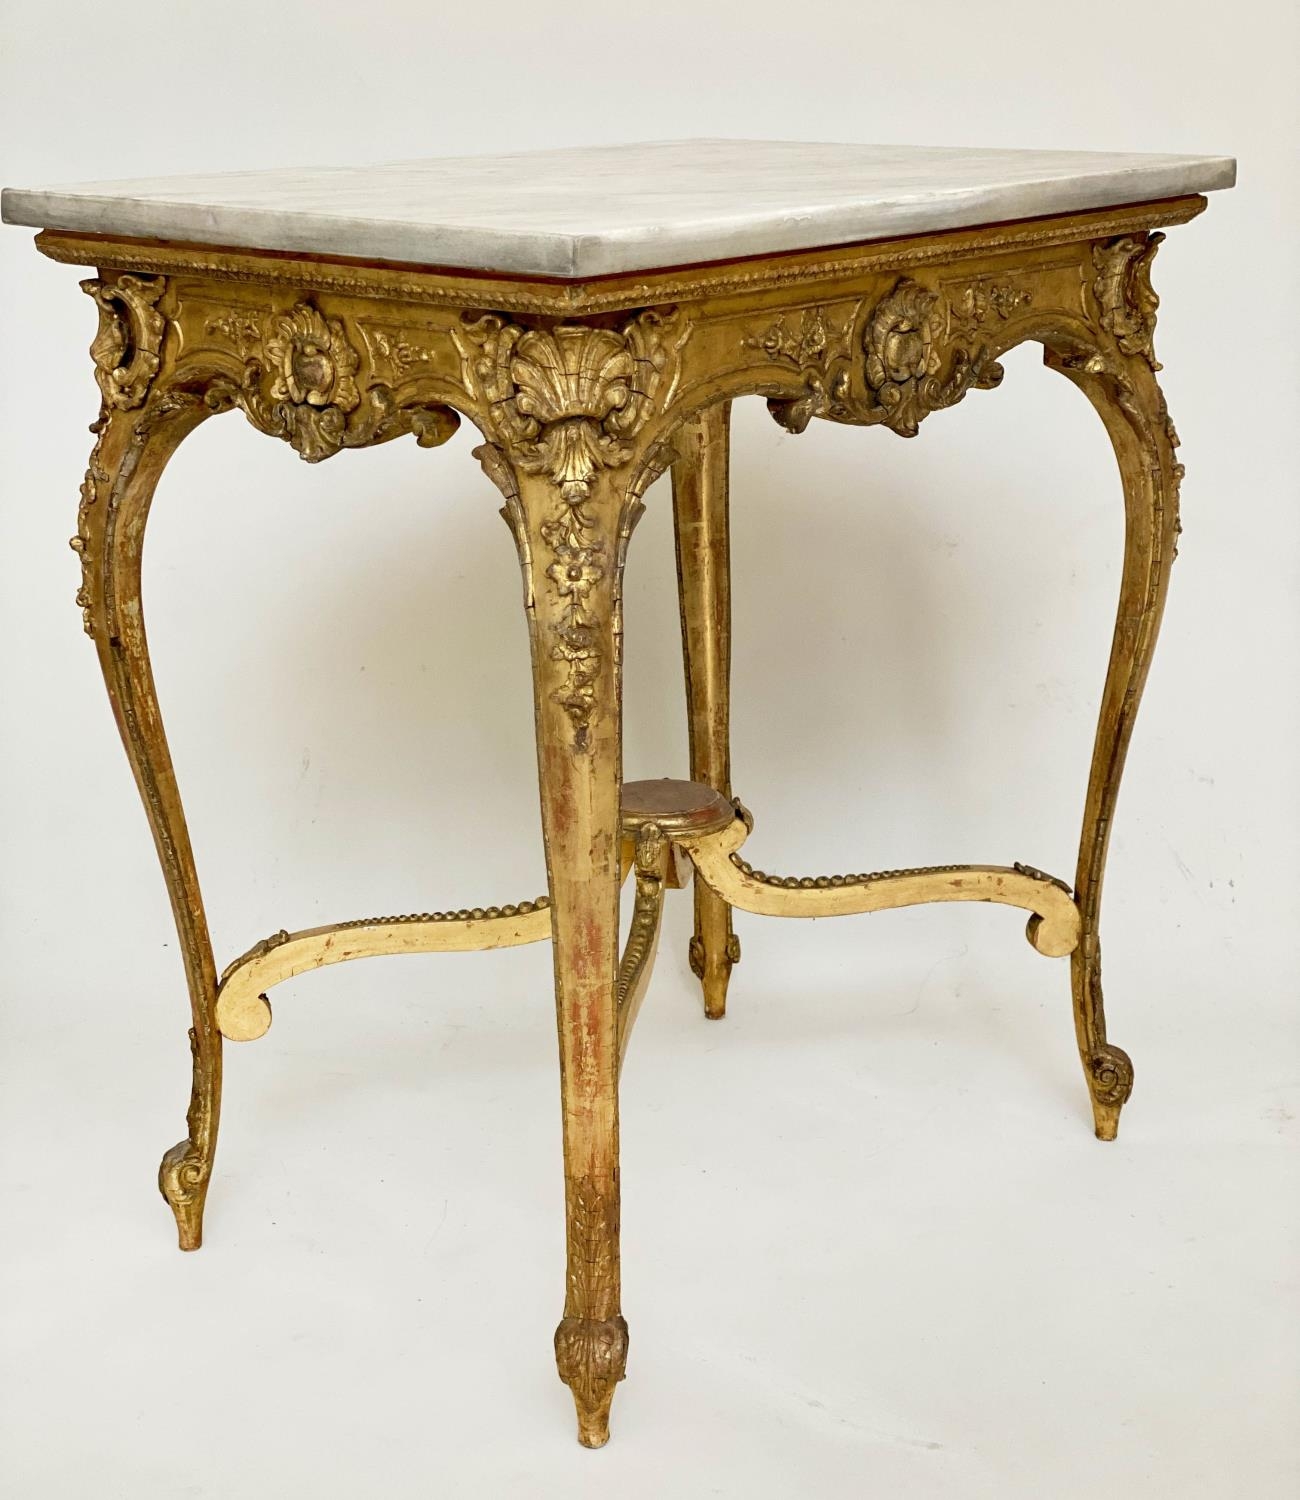 CENTRE TABLE, 19th century Italian giltwood and gesso with shell and C scroll decoration, marble top - Image 2 of 11